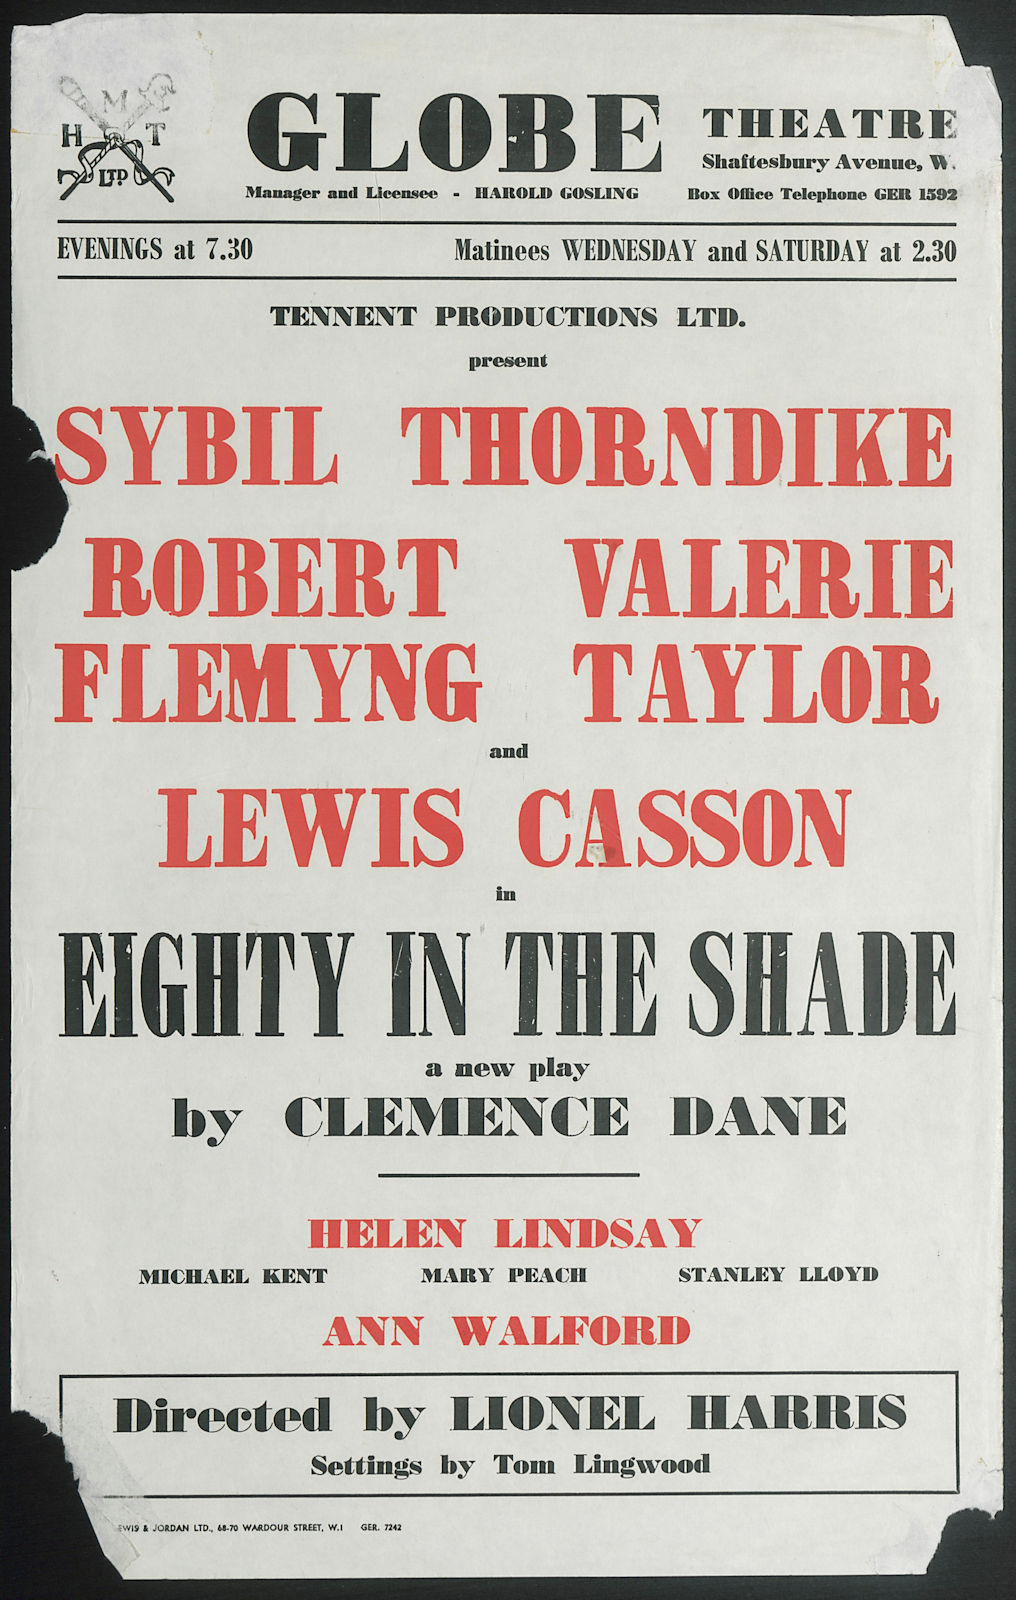 Associate Product Globe Theatre. Eighty in the Shade. Clement Dane. Sybil Thorndike. Flemyng 1959